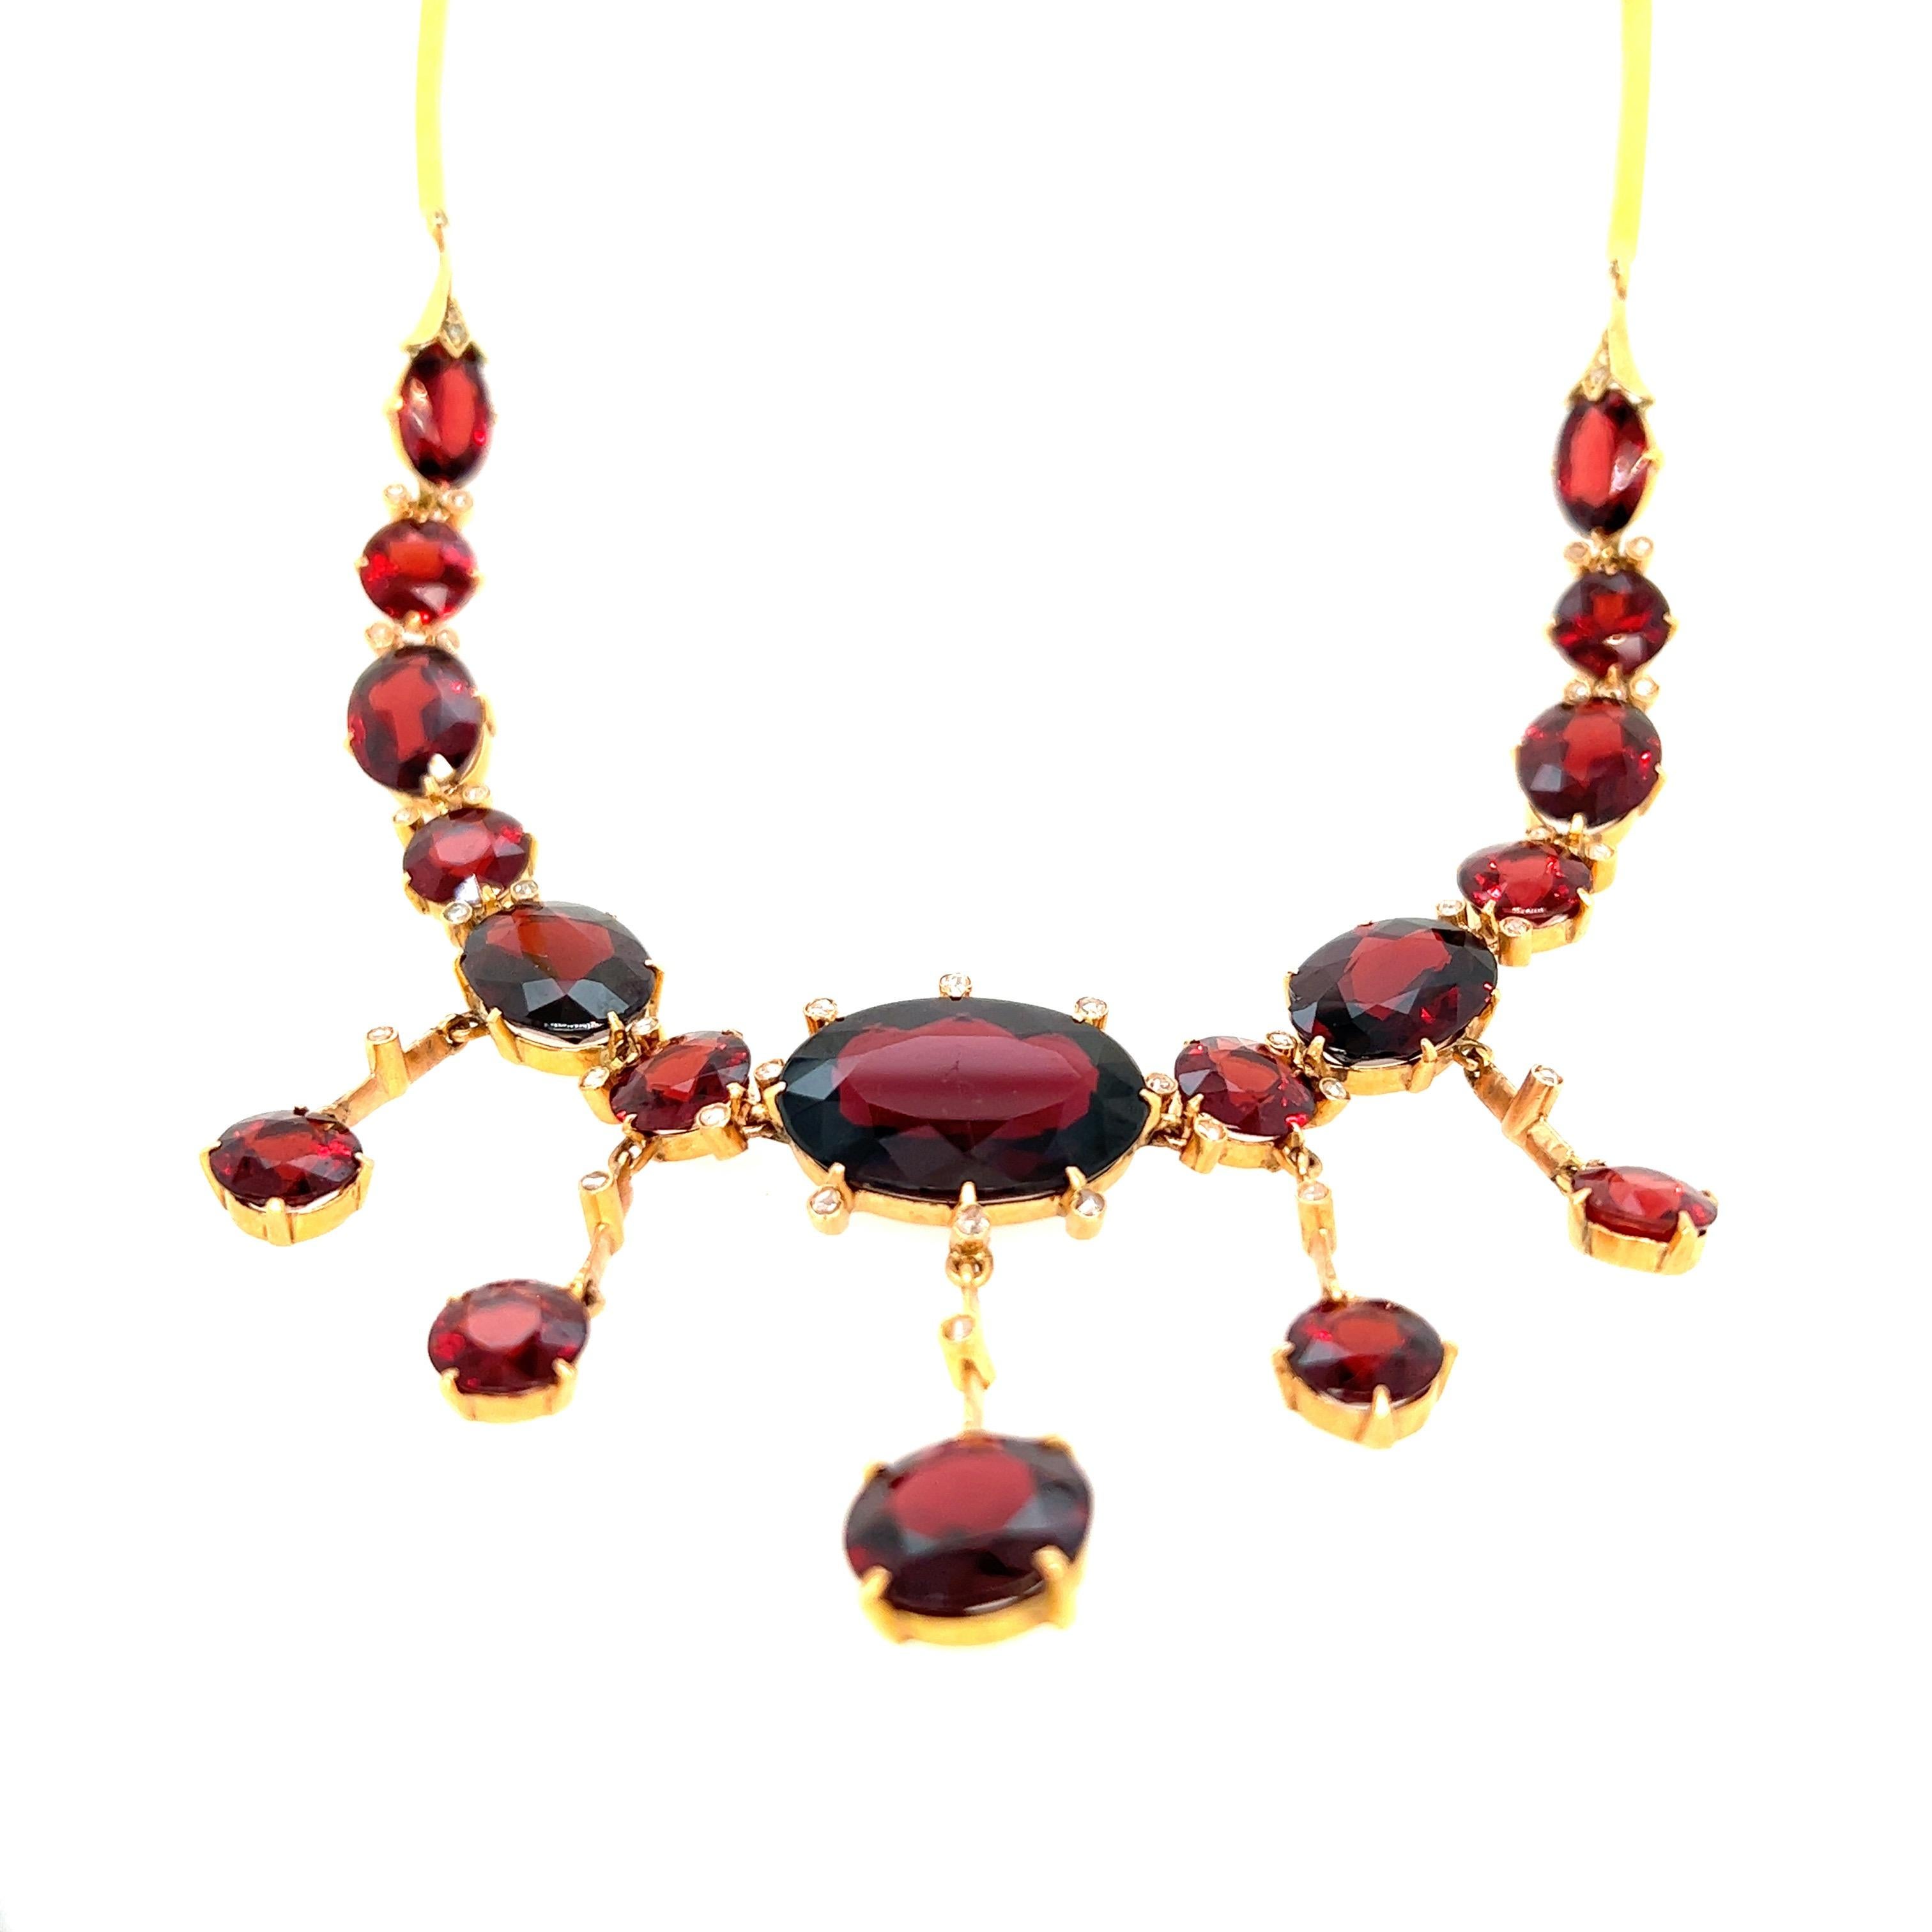 Antique garnet gold necklace 

Oval- and round-cut garnets of approximately 70-80 carats, 14 karat yellow gold

Size: length 15.25 inches
Total weight: 42.5 grams 